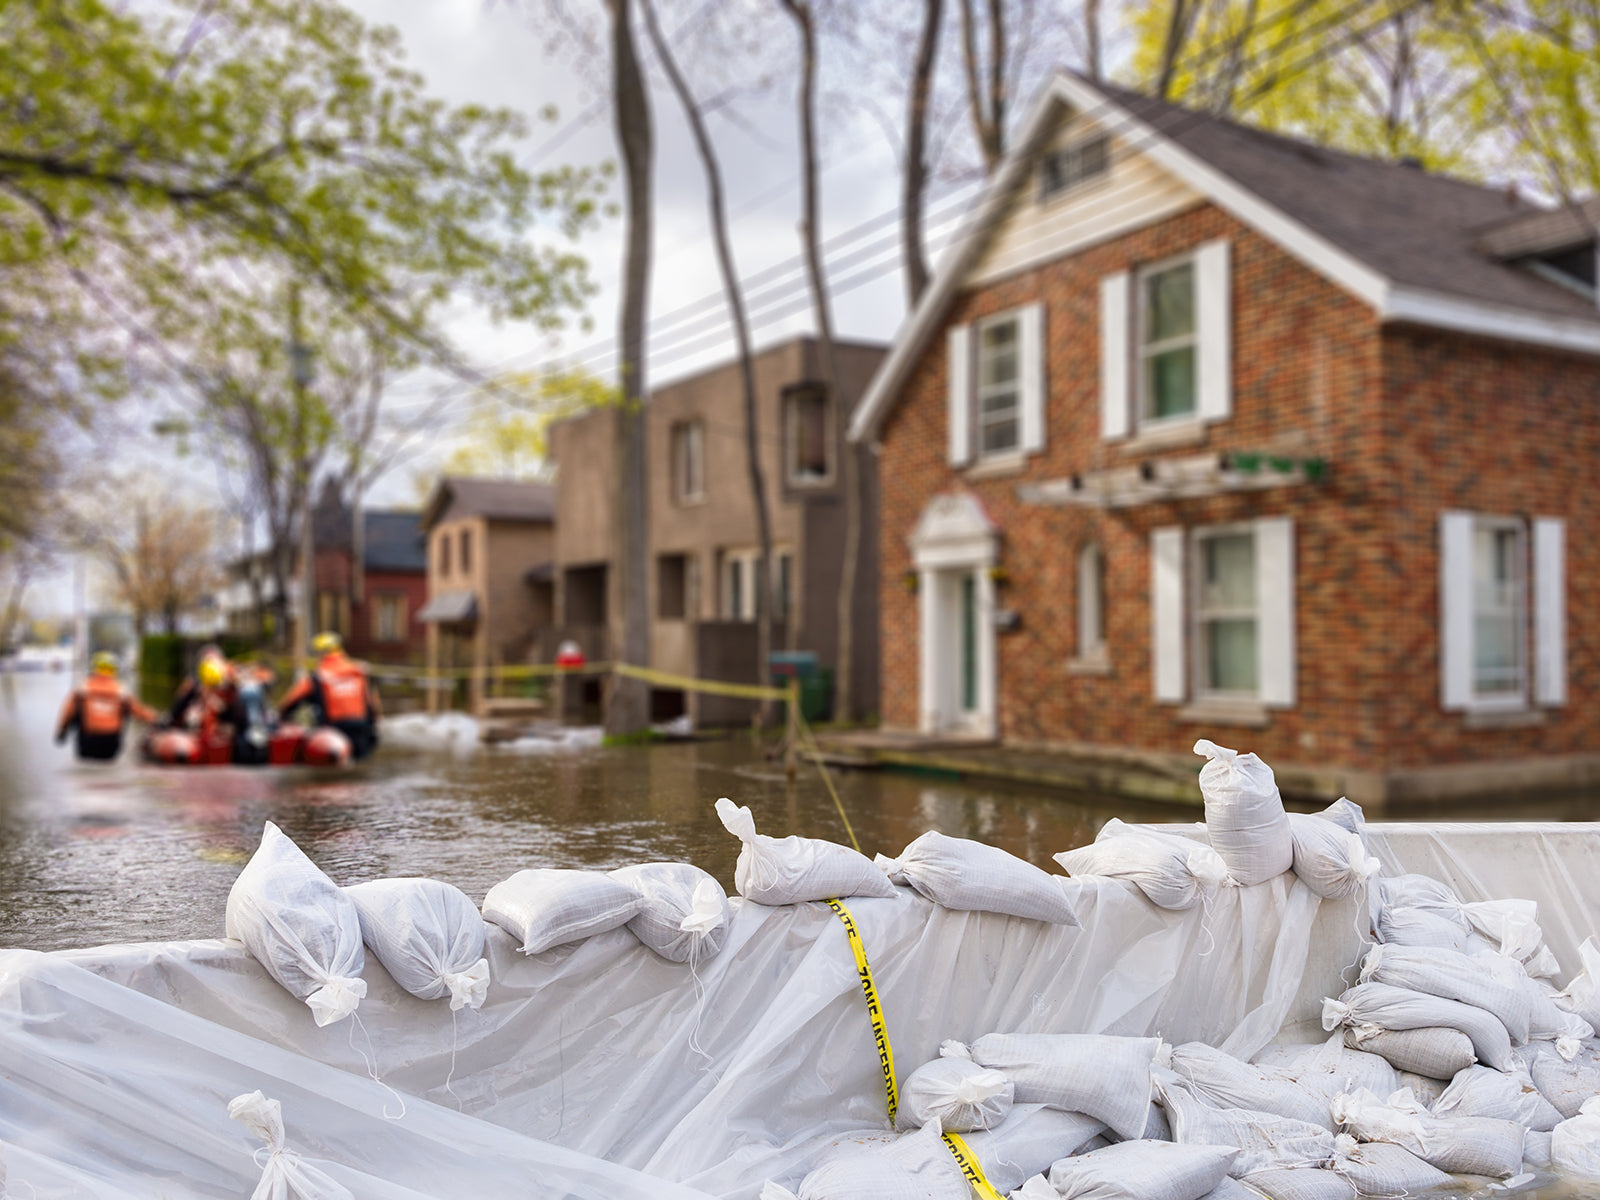 Sandbags holding back floodwaters before houses